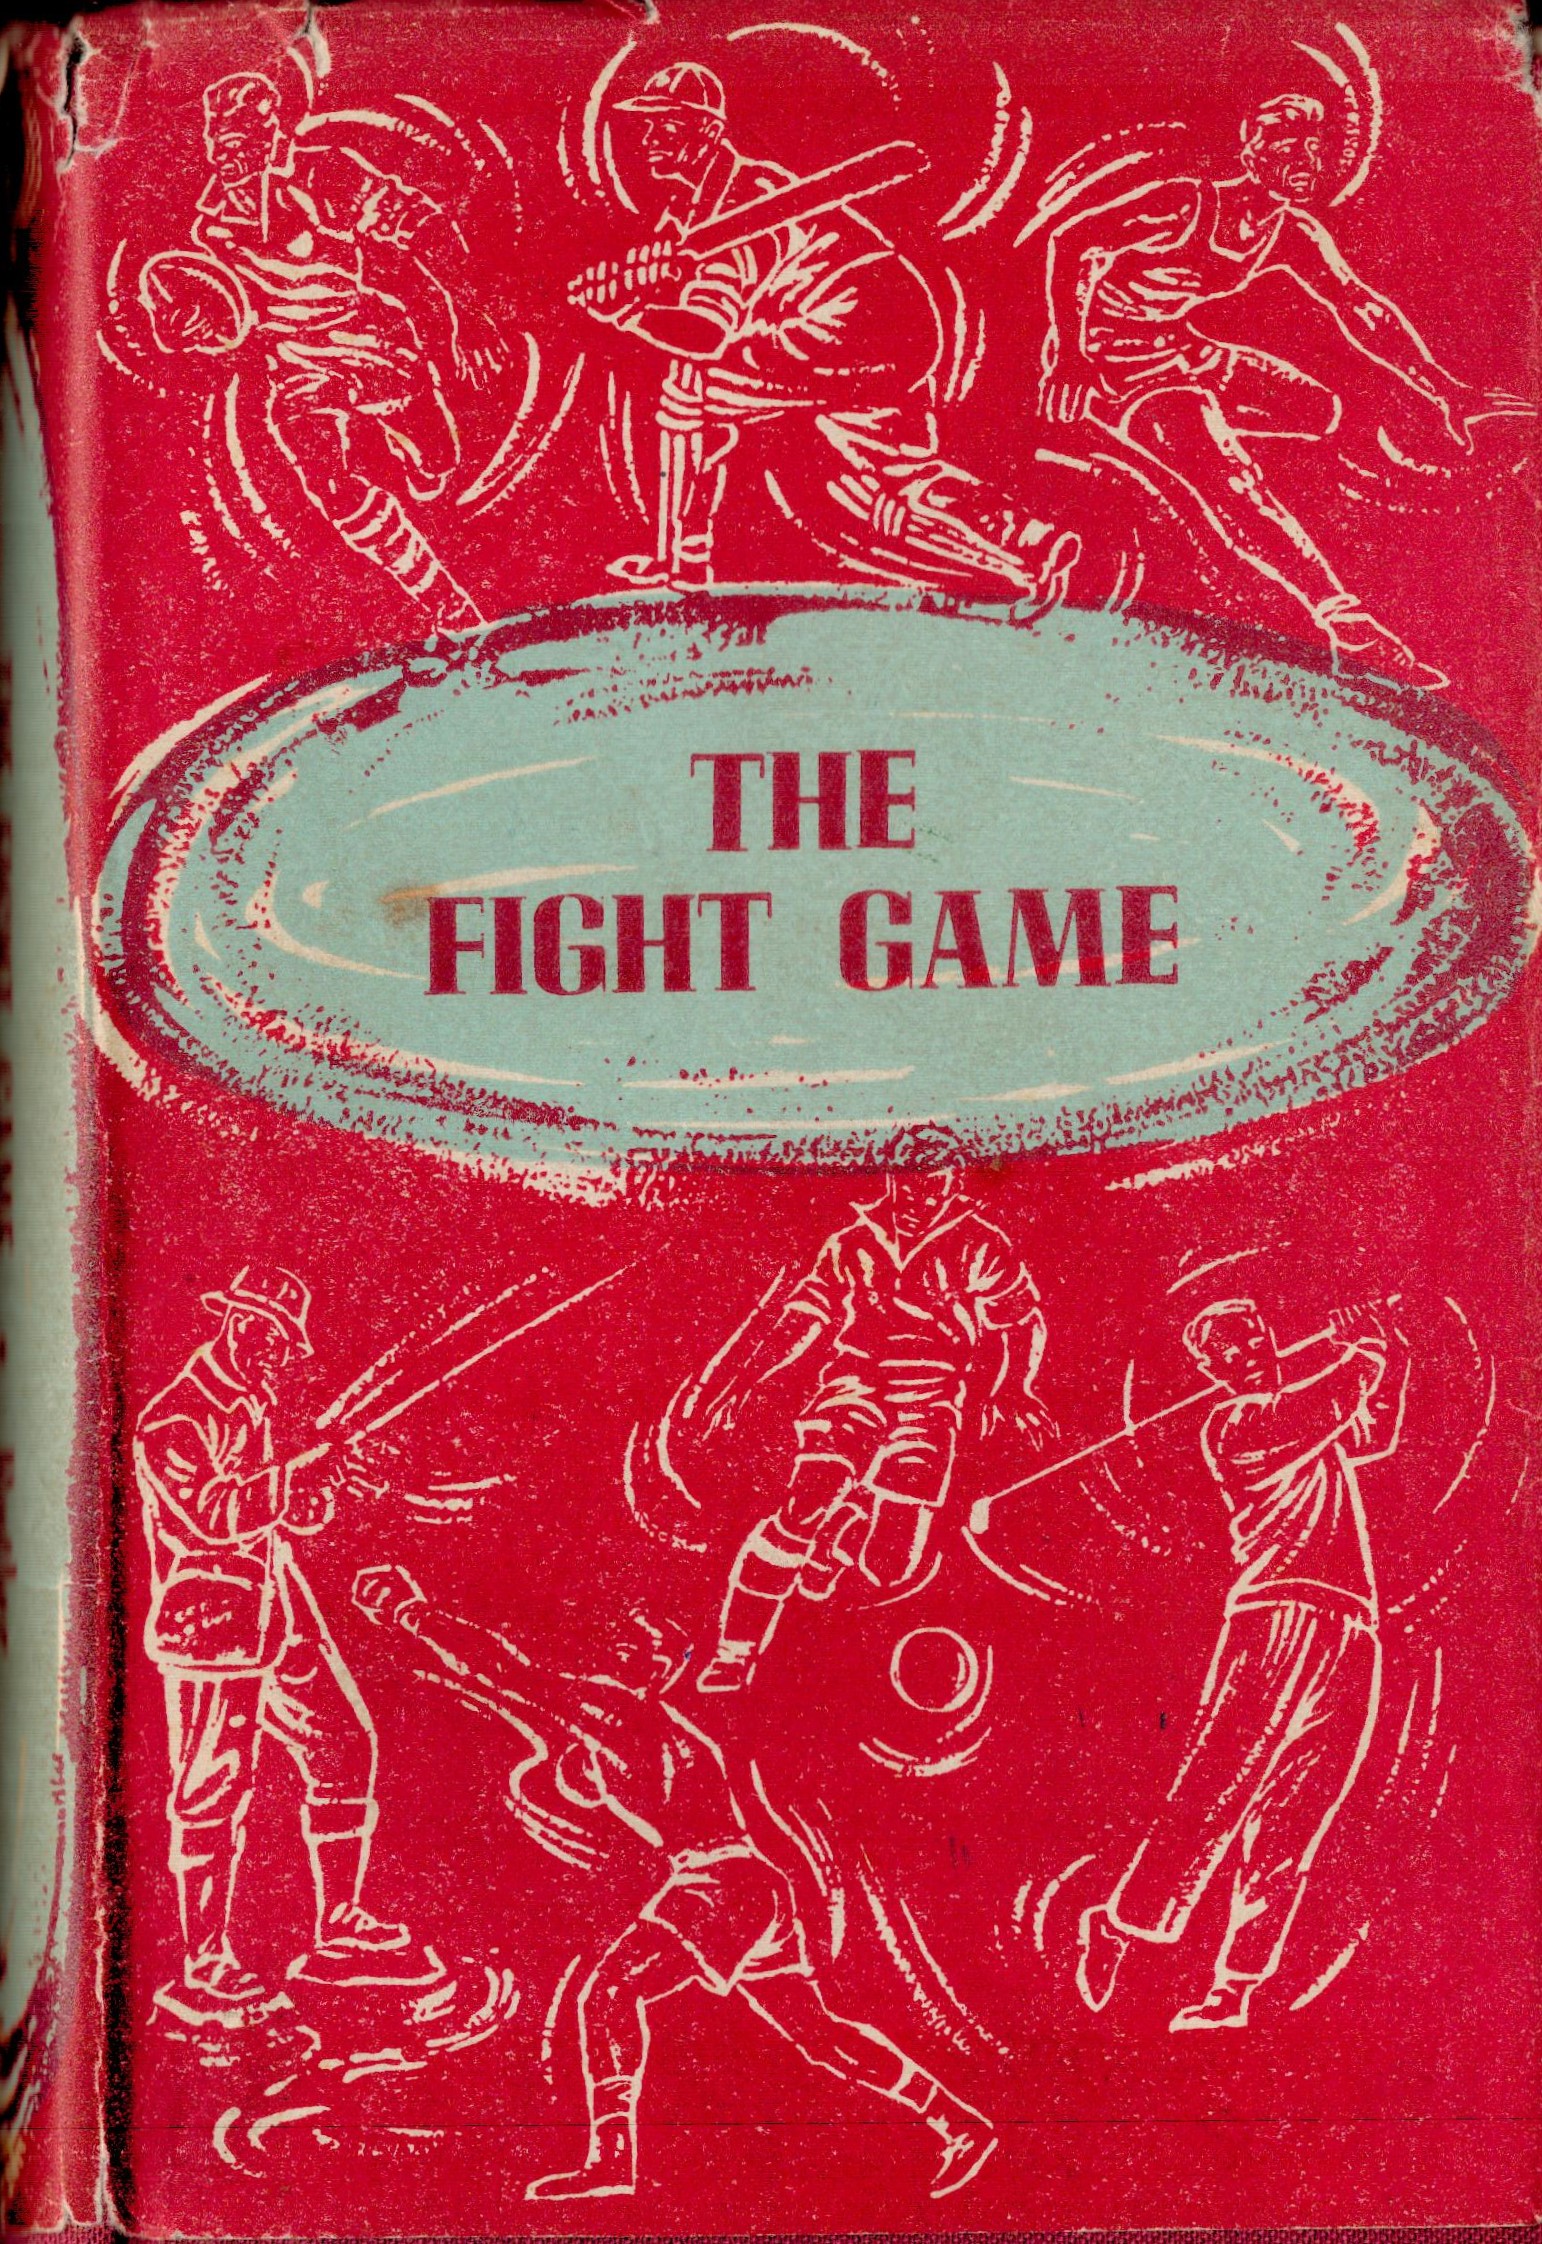 The Fight Game by James and Frank Butler Hardback Book 1956 Second Edition published by The